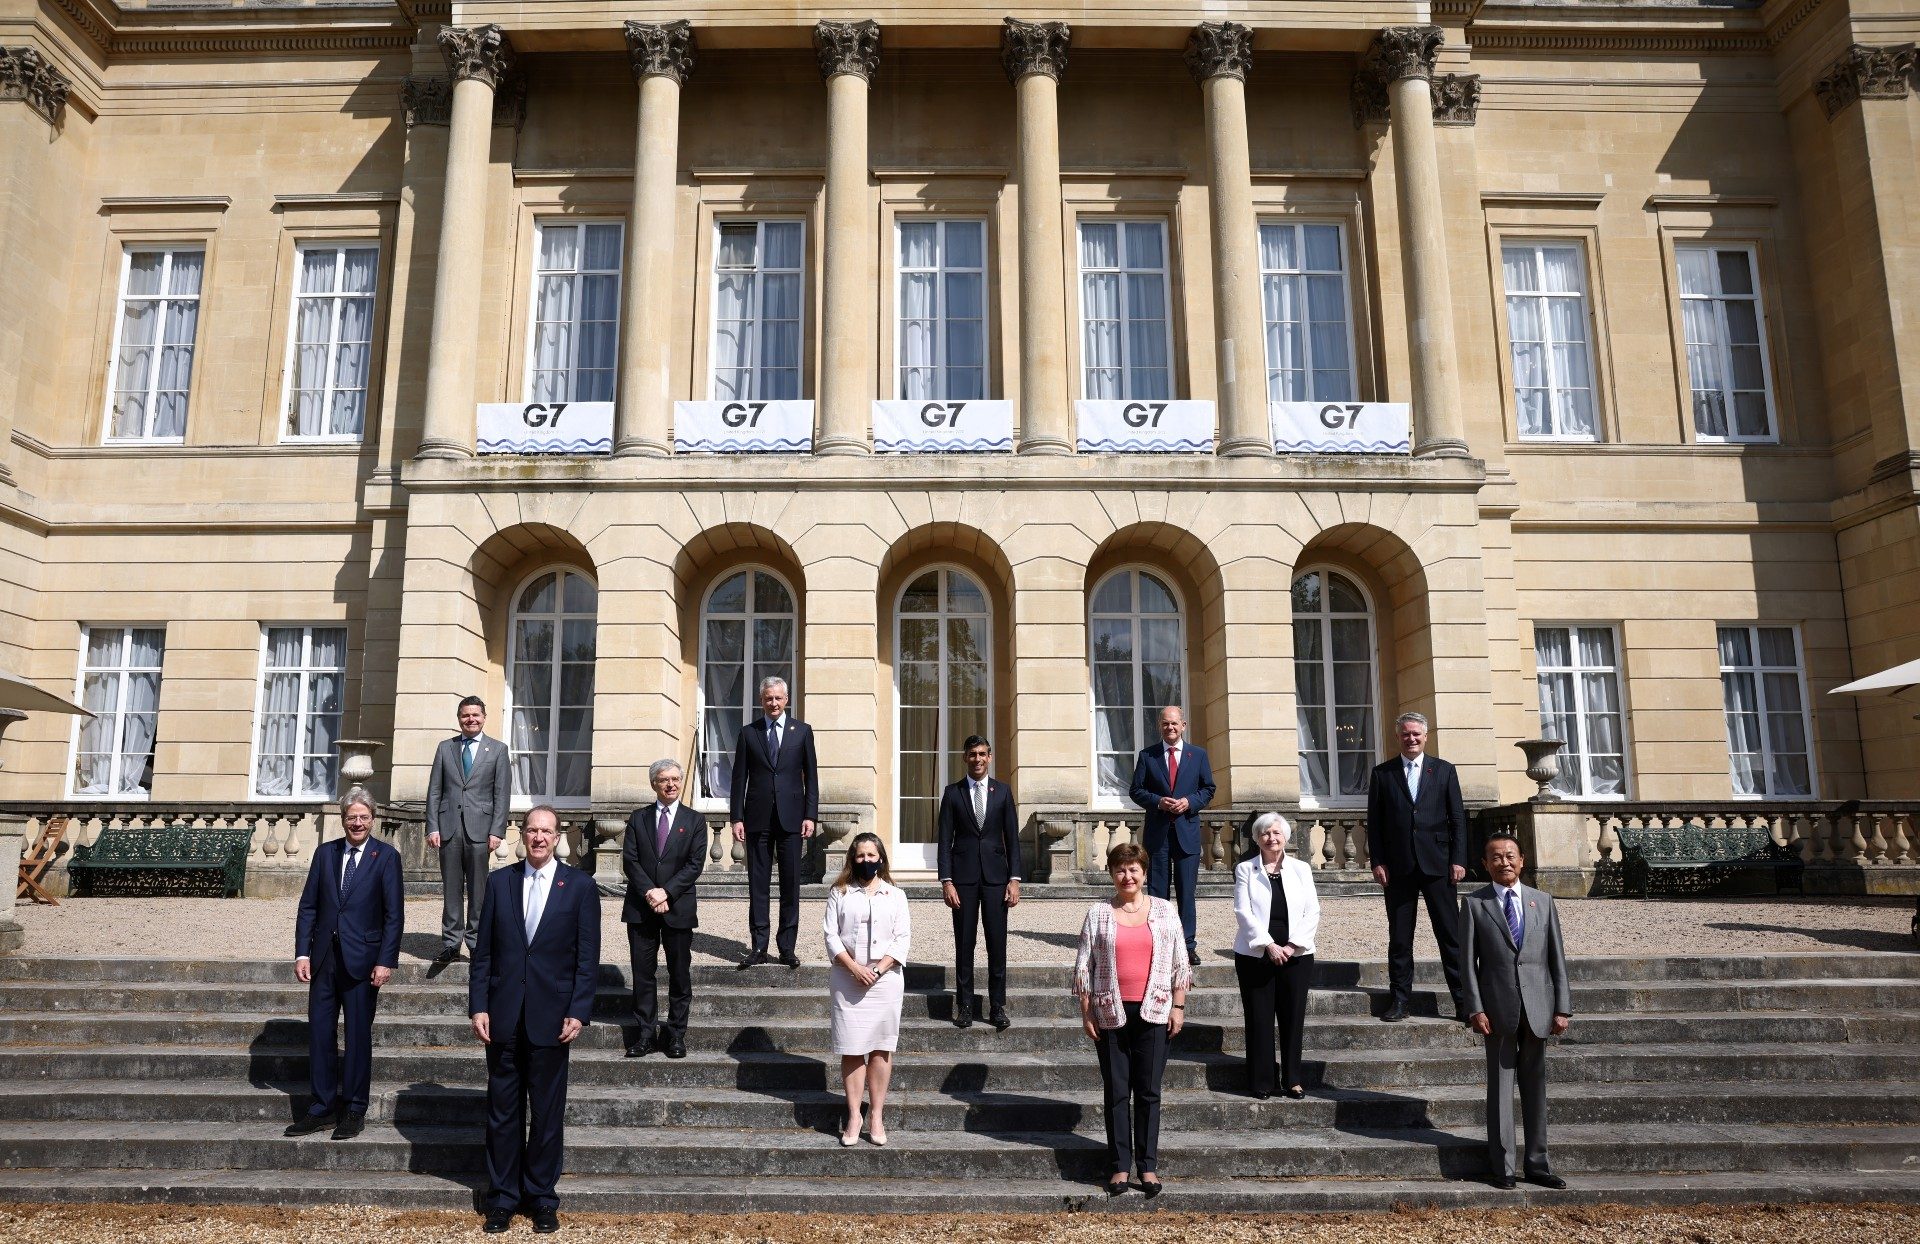 G7 nations near historic deal on taxing multinationals